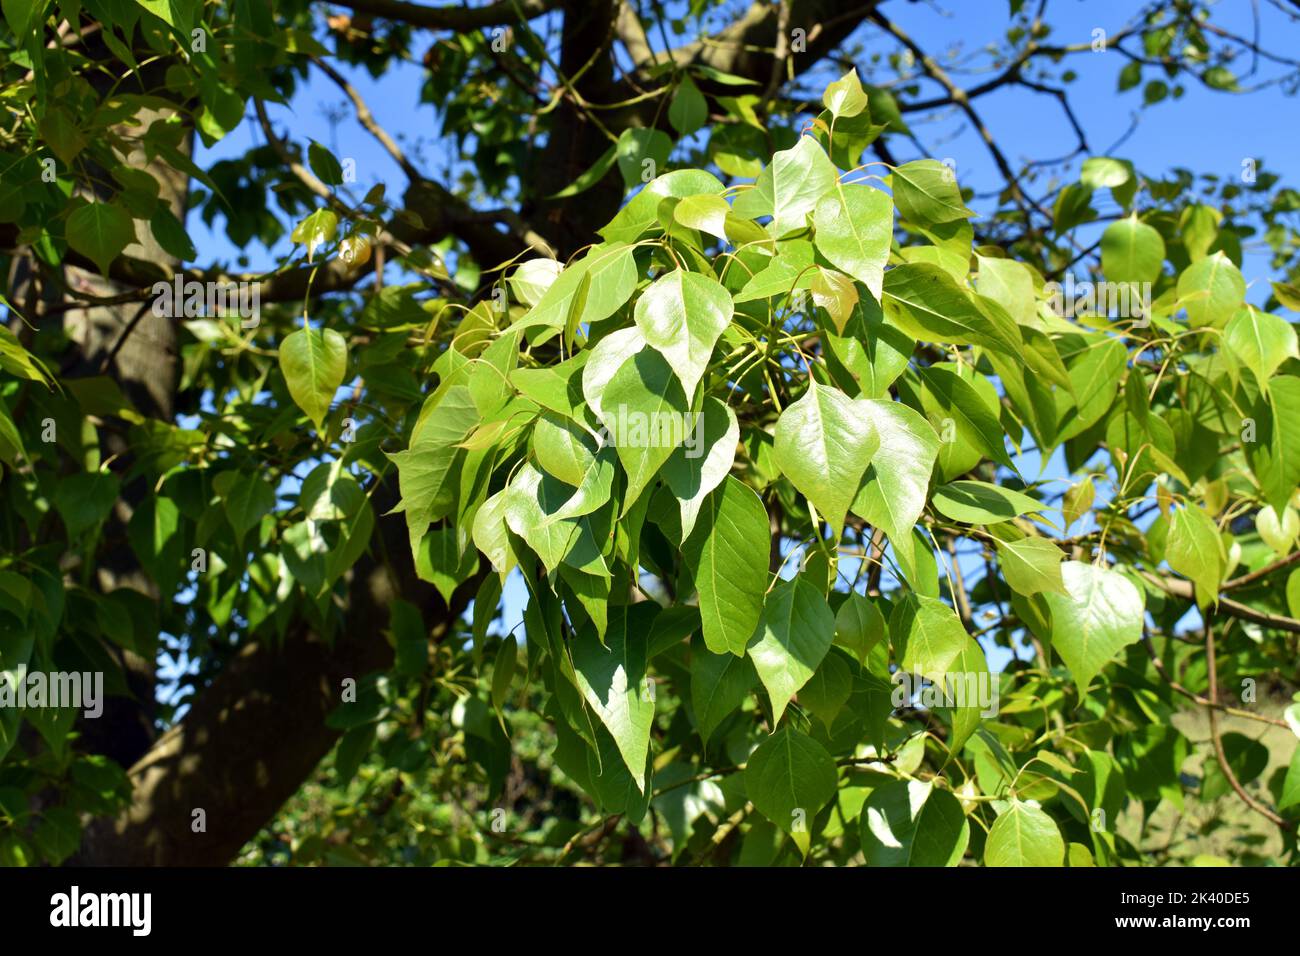 Brachychiton populneus, an ornamental tree used in landscaping. Arboretum of the University of the Basque Country. Leioa. Spain Stock Photo